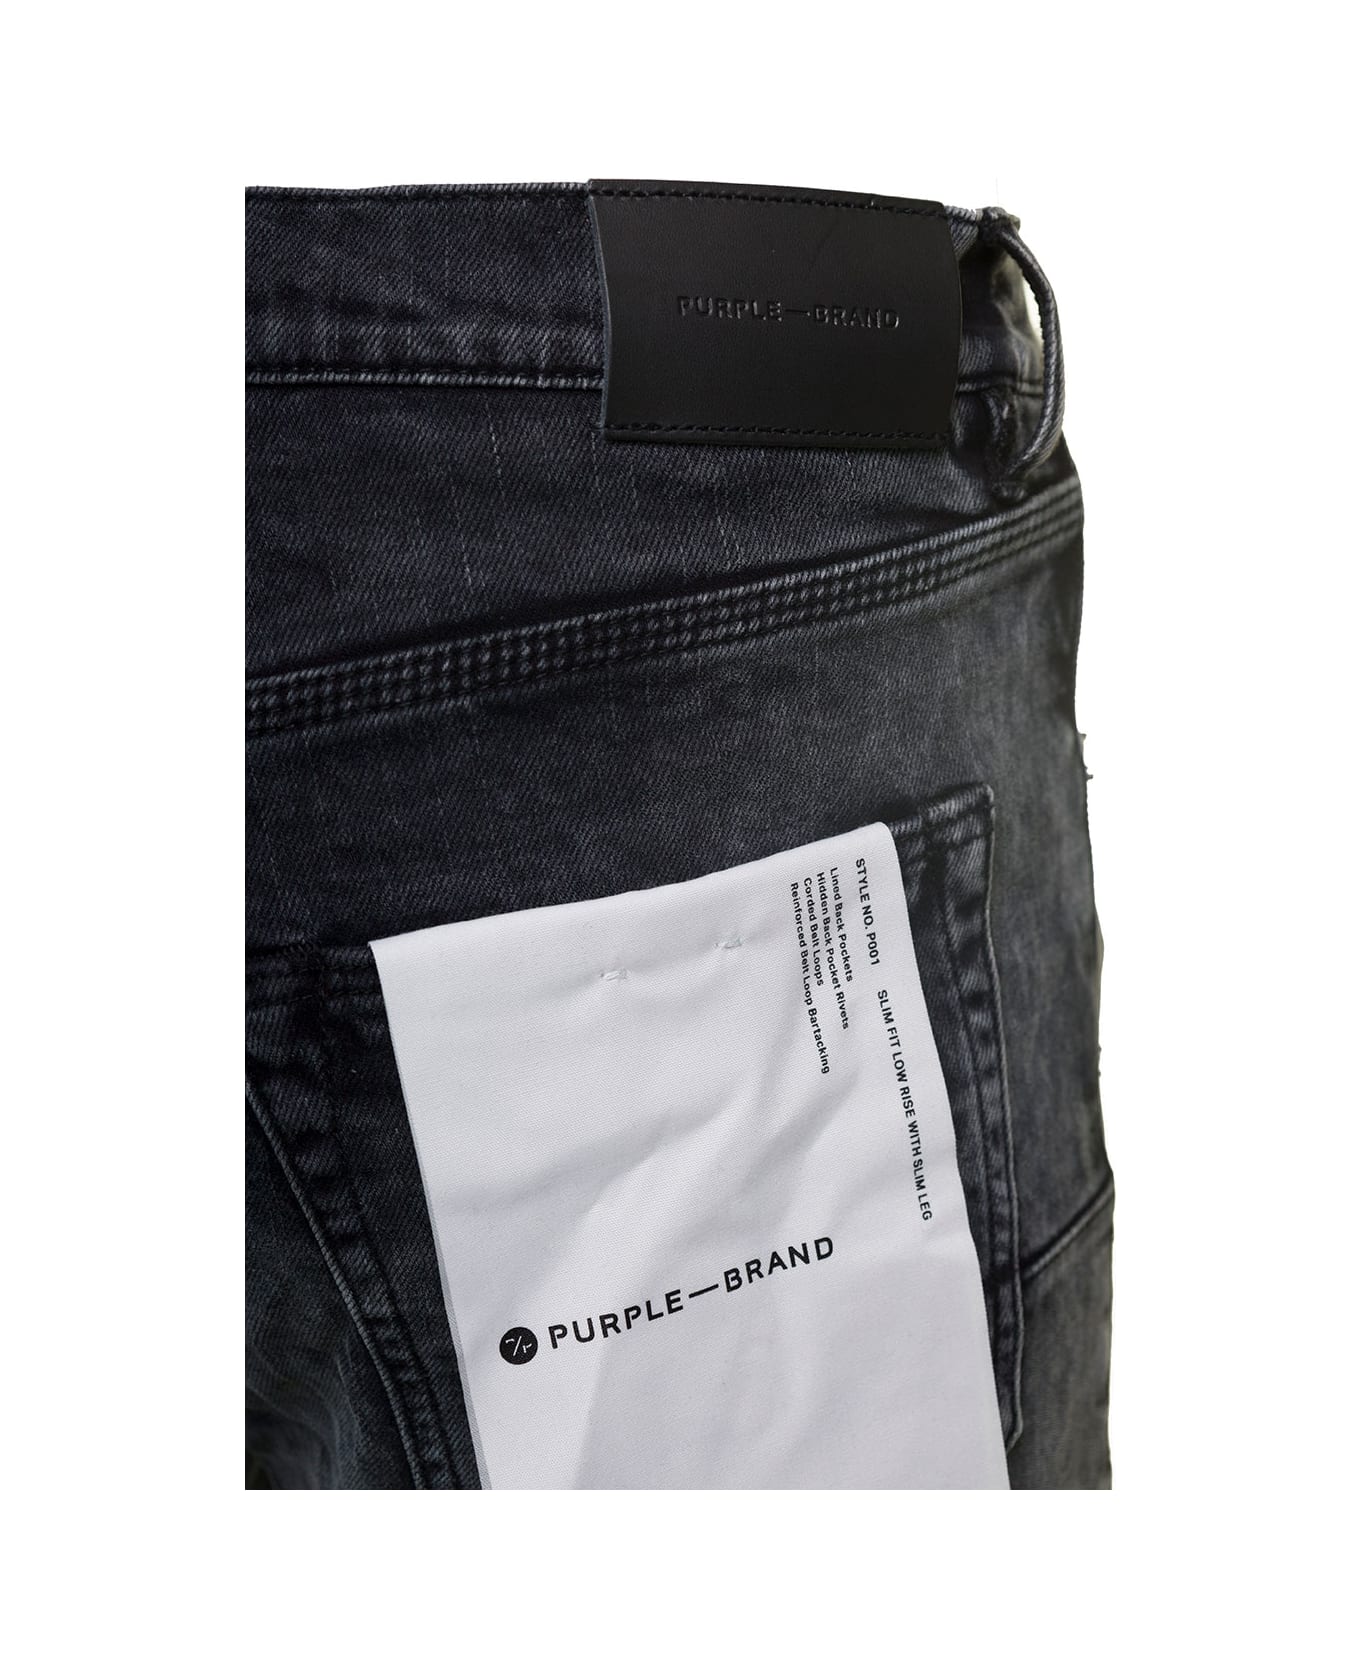 Purple Brand Black Skinny Jeans With Tonal Logo Patch And Crinkled Effect In Stretch Cotton Denim Man - Black デニム